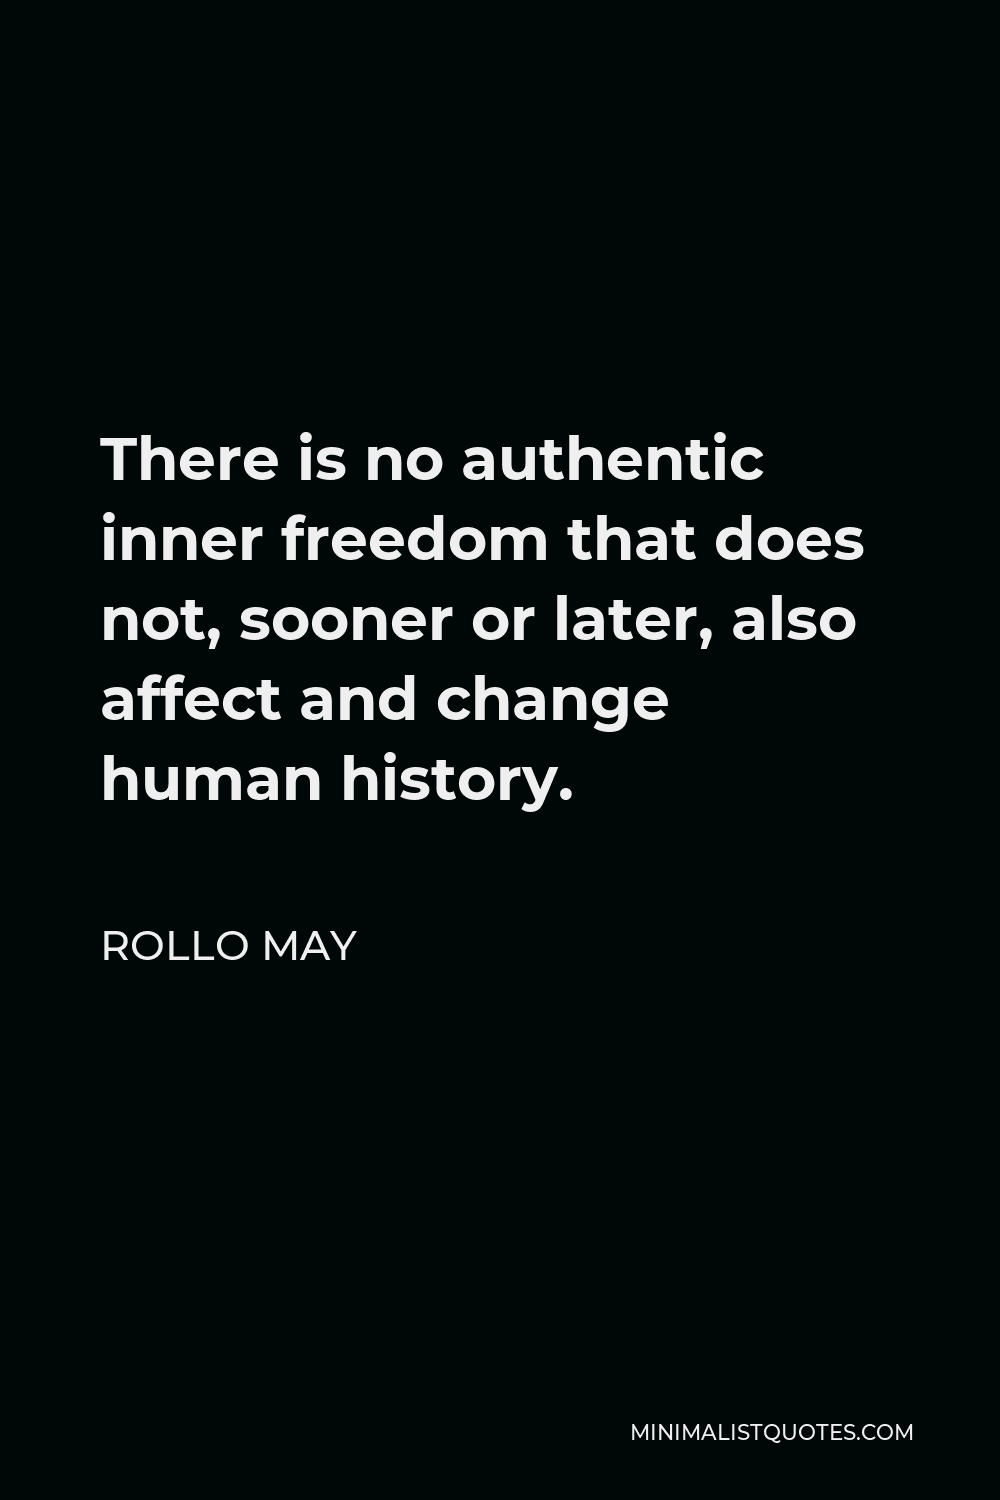 Rollo May Quote - There is no authentic inner freedom that does not, sooner or later, also affect and change human history.